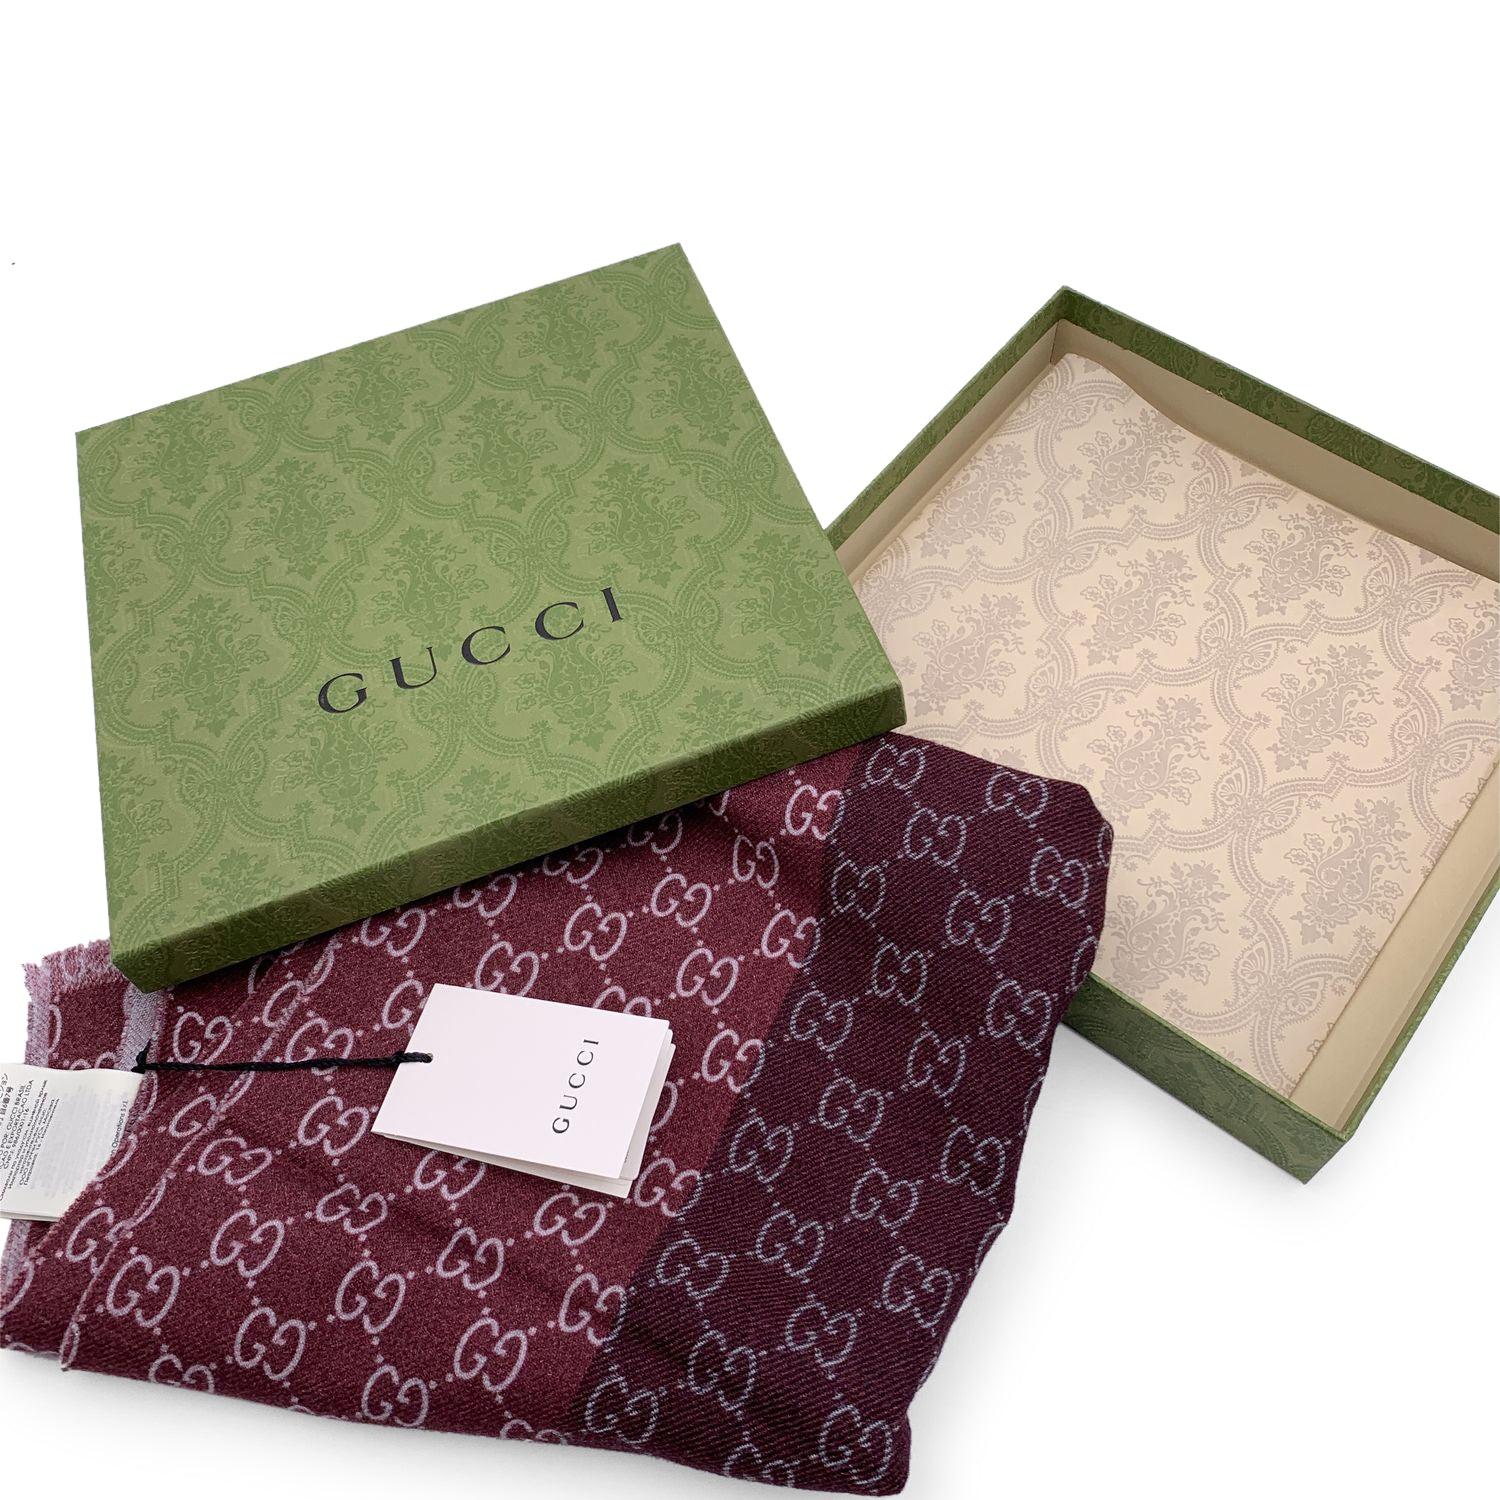 Burgundy and grey GG Guccissima wool scarf by Gucci. Composition: 100% wool. Width: 45 cm. Lenght: 180 cm. Frayed edges. Made in Italy. Details MATERIAL: Wool COLOR: Burgundy MODEL: n.a. GENDER: Unisex Adults COUNTRY OF MANUFACTURE: Italy FEATURES: